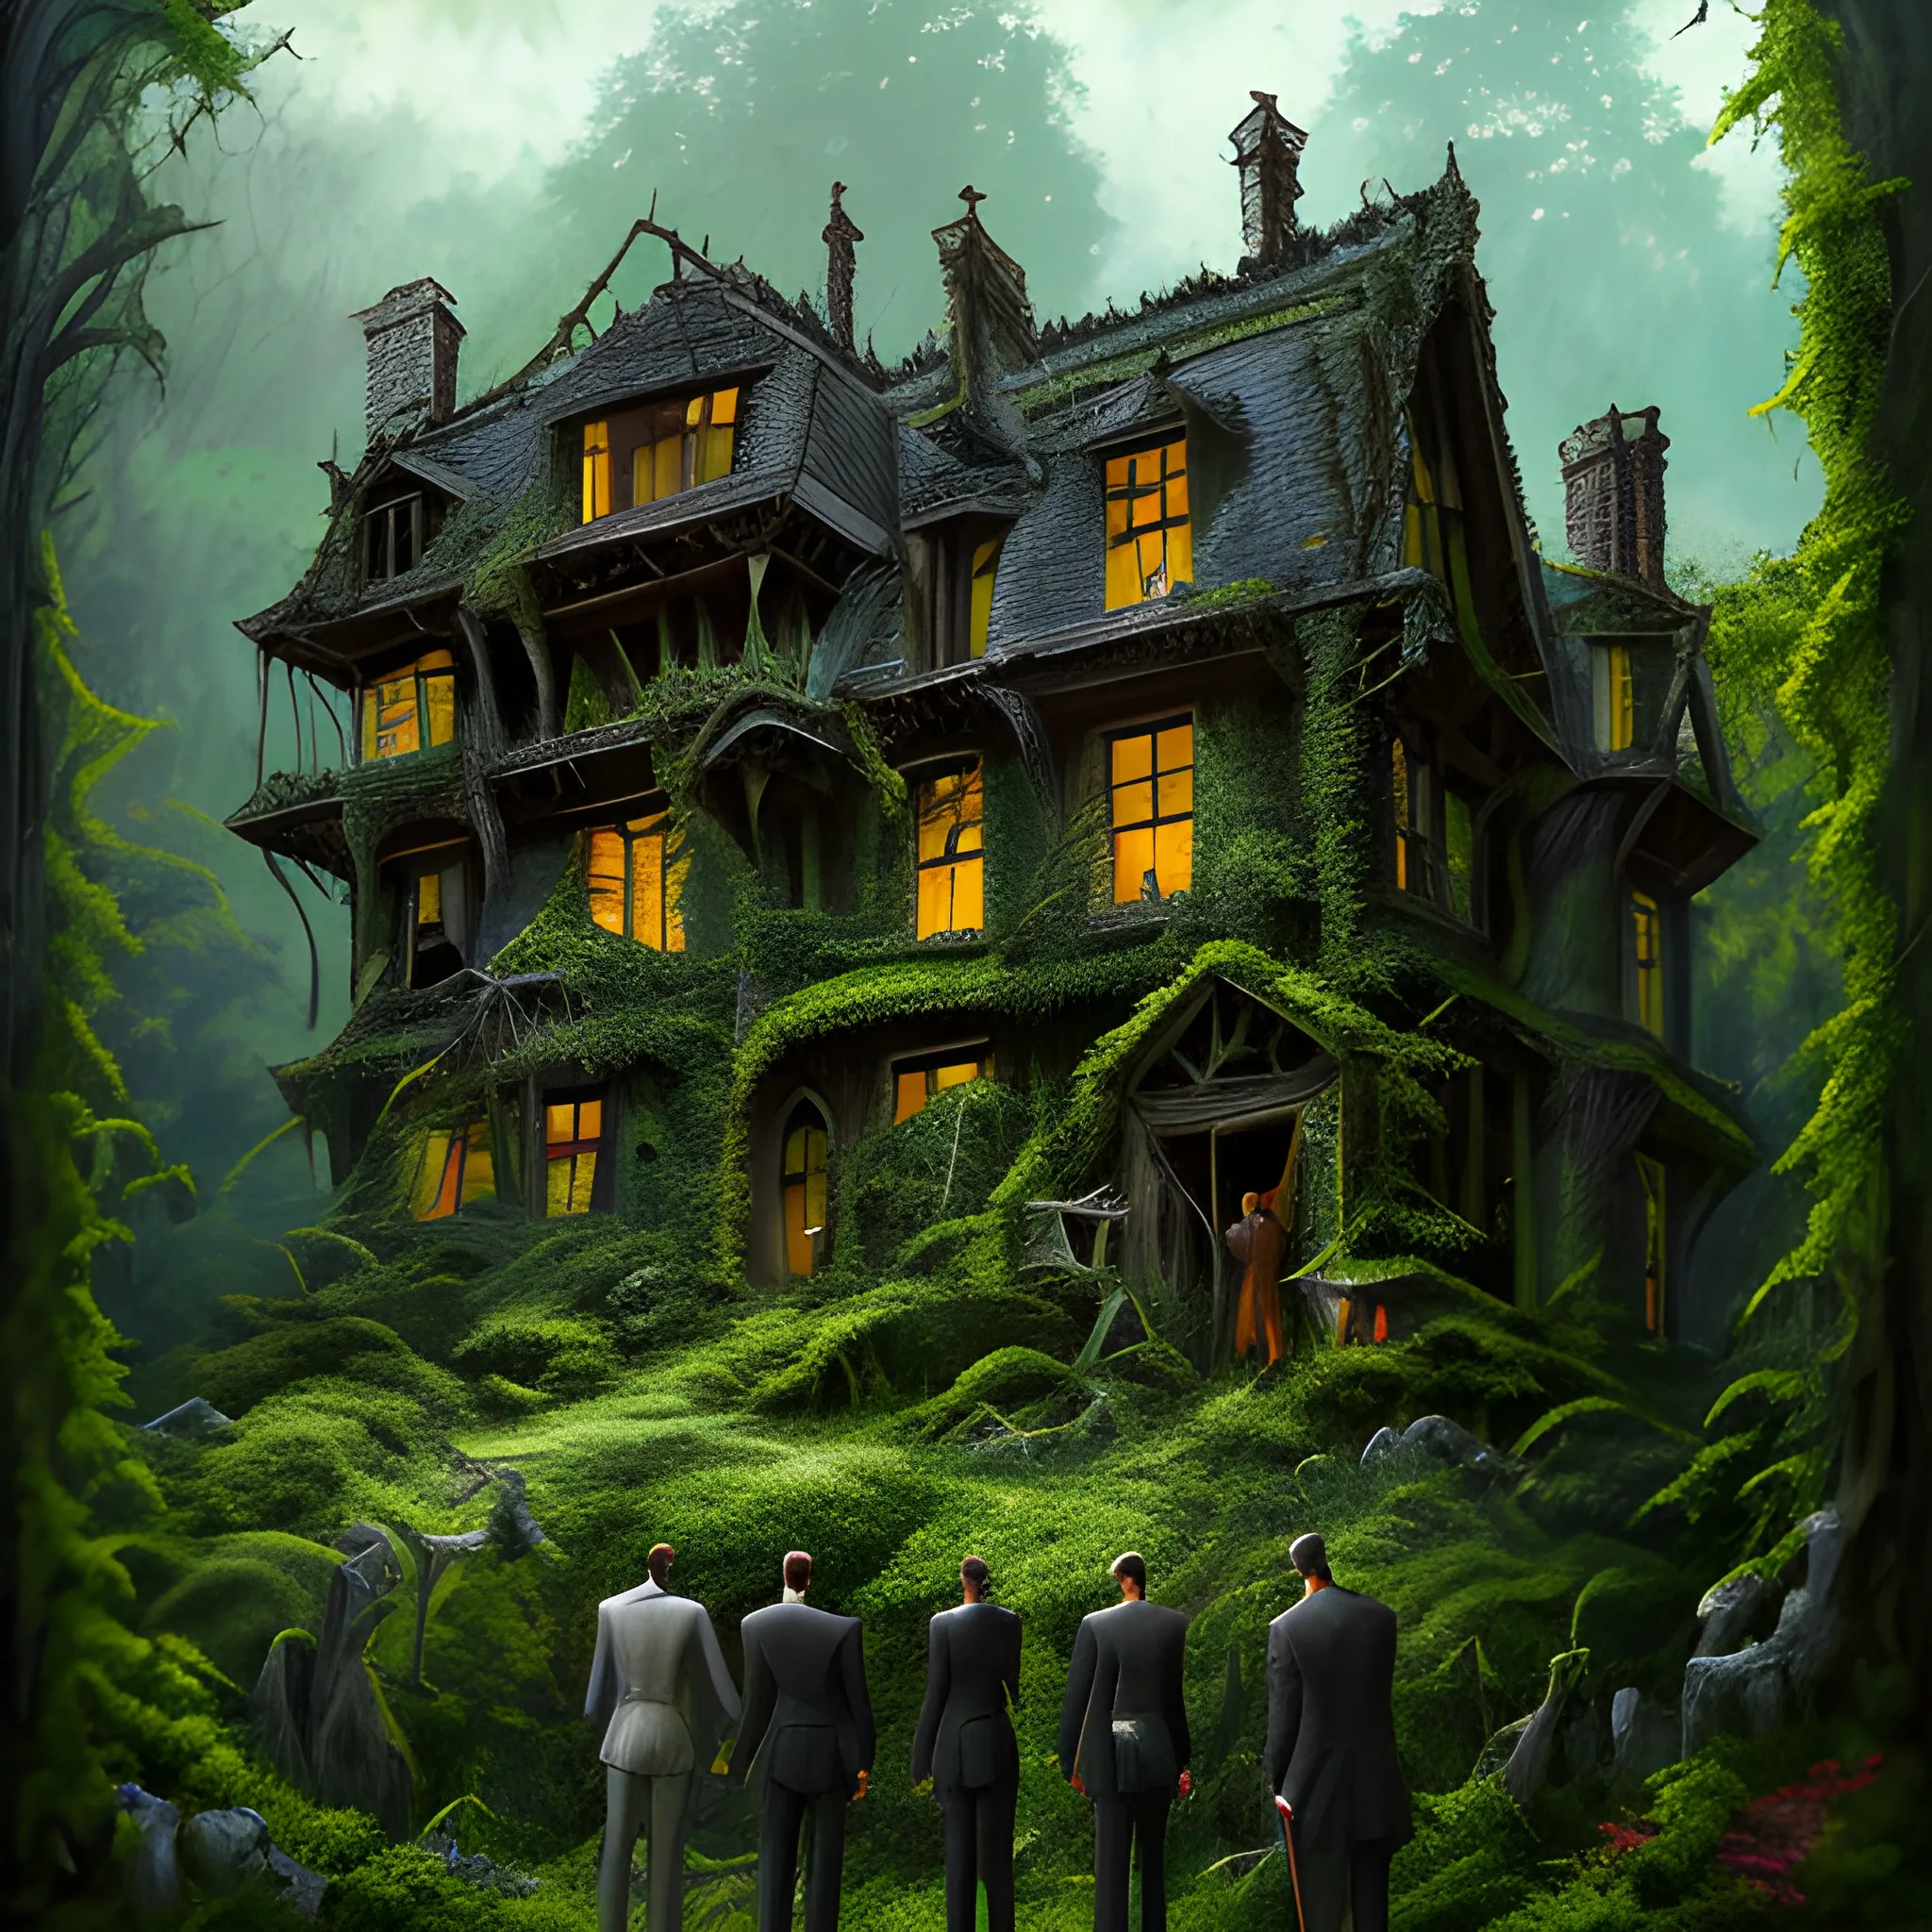 Description: Picture four children (two boys and two girls) standing at the edge of a dense forest. They should look intrigued and maybe a bit cautious as they observe an old, eerie house that seems to have appeared among the trees. The house should look dilapidated, with broken windows and ivy creeping up its walls., , 3D, Oil Painting